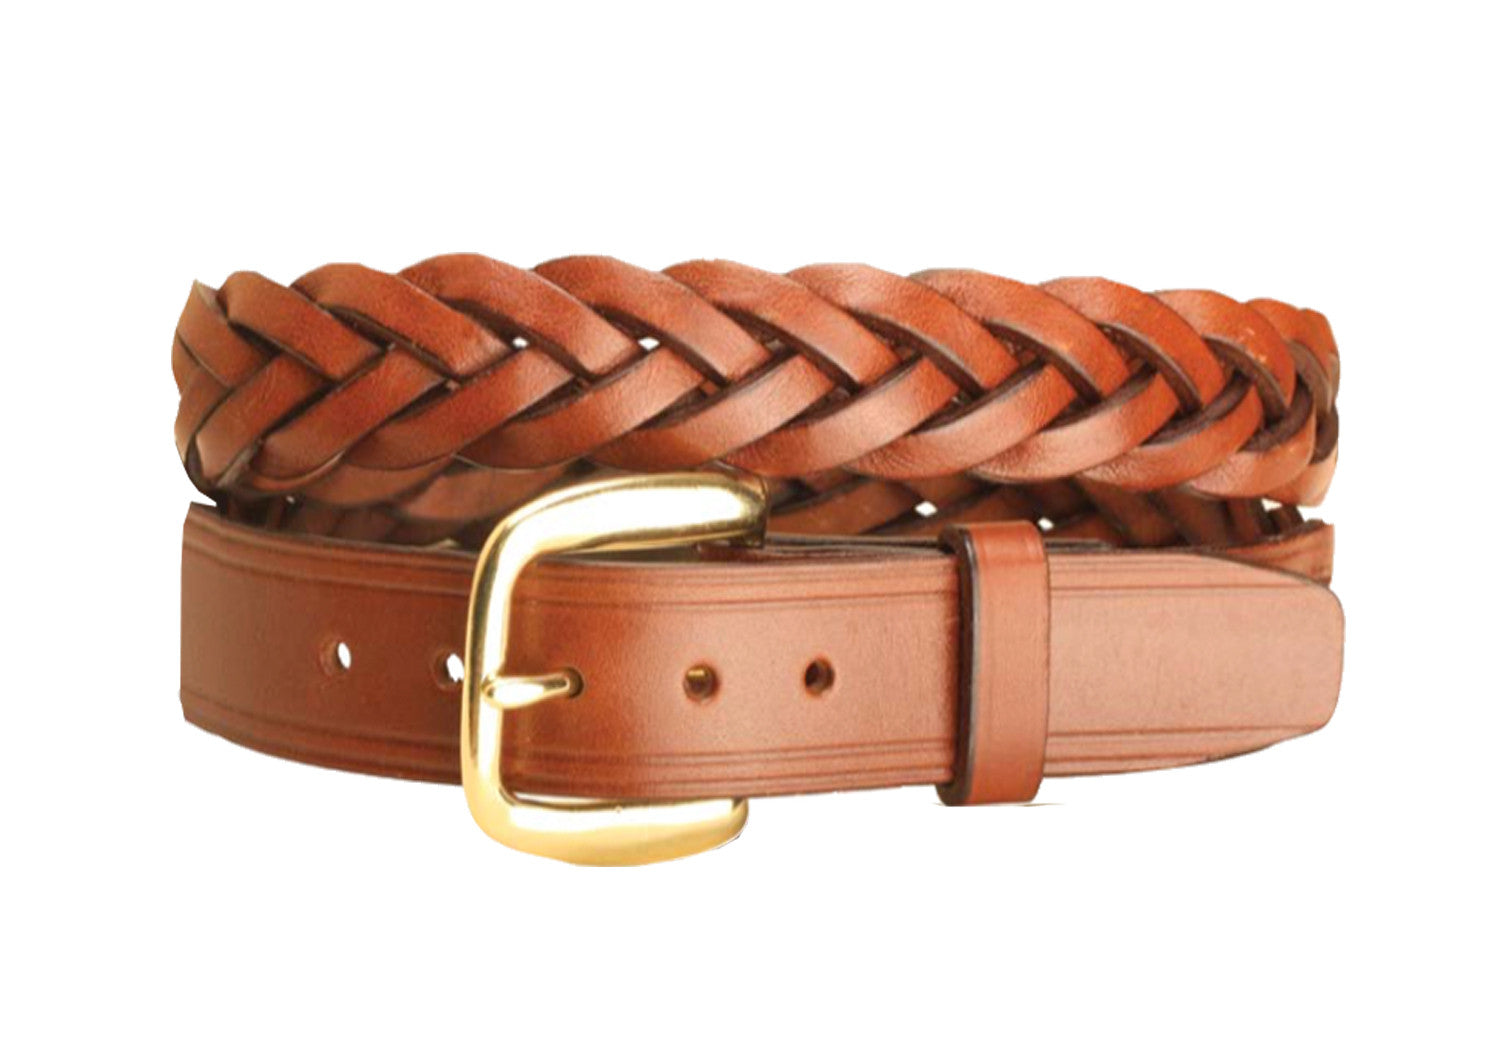 Bke Braided Leather Belt - Brown X-Small, Women's